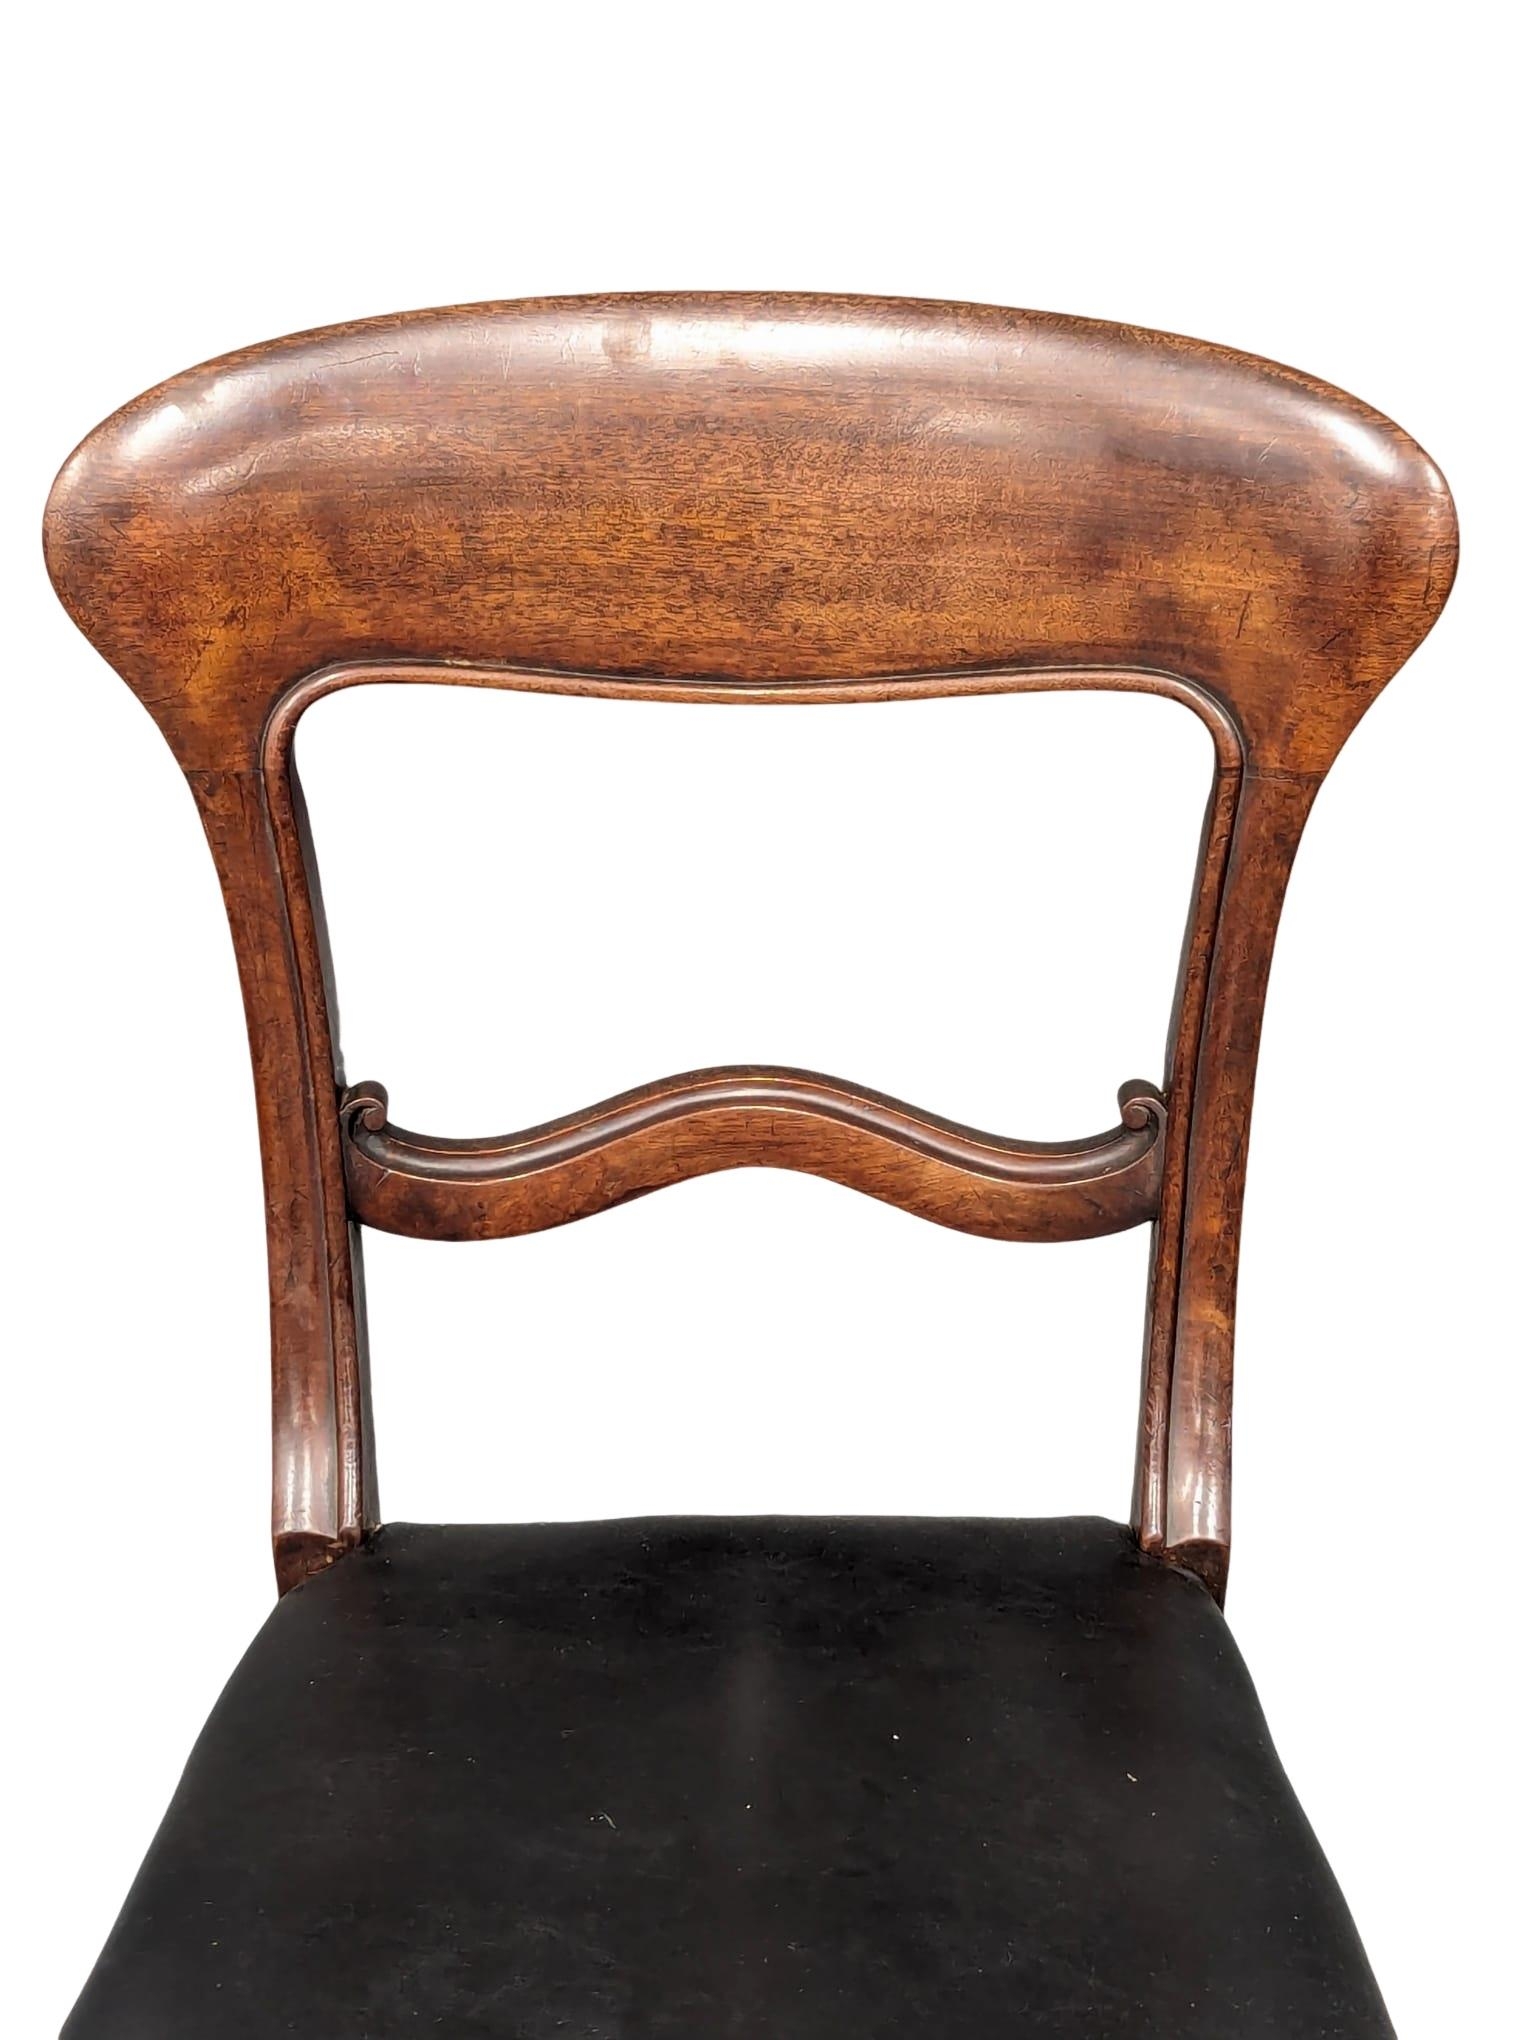 A set of 4 good quality Victorian mahogany dining chairs - Image 2 of 4